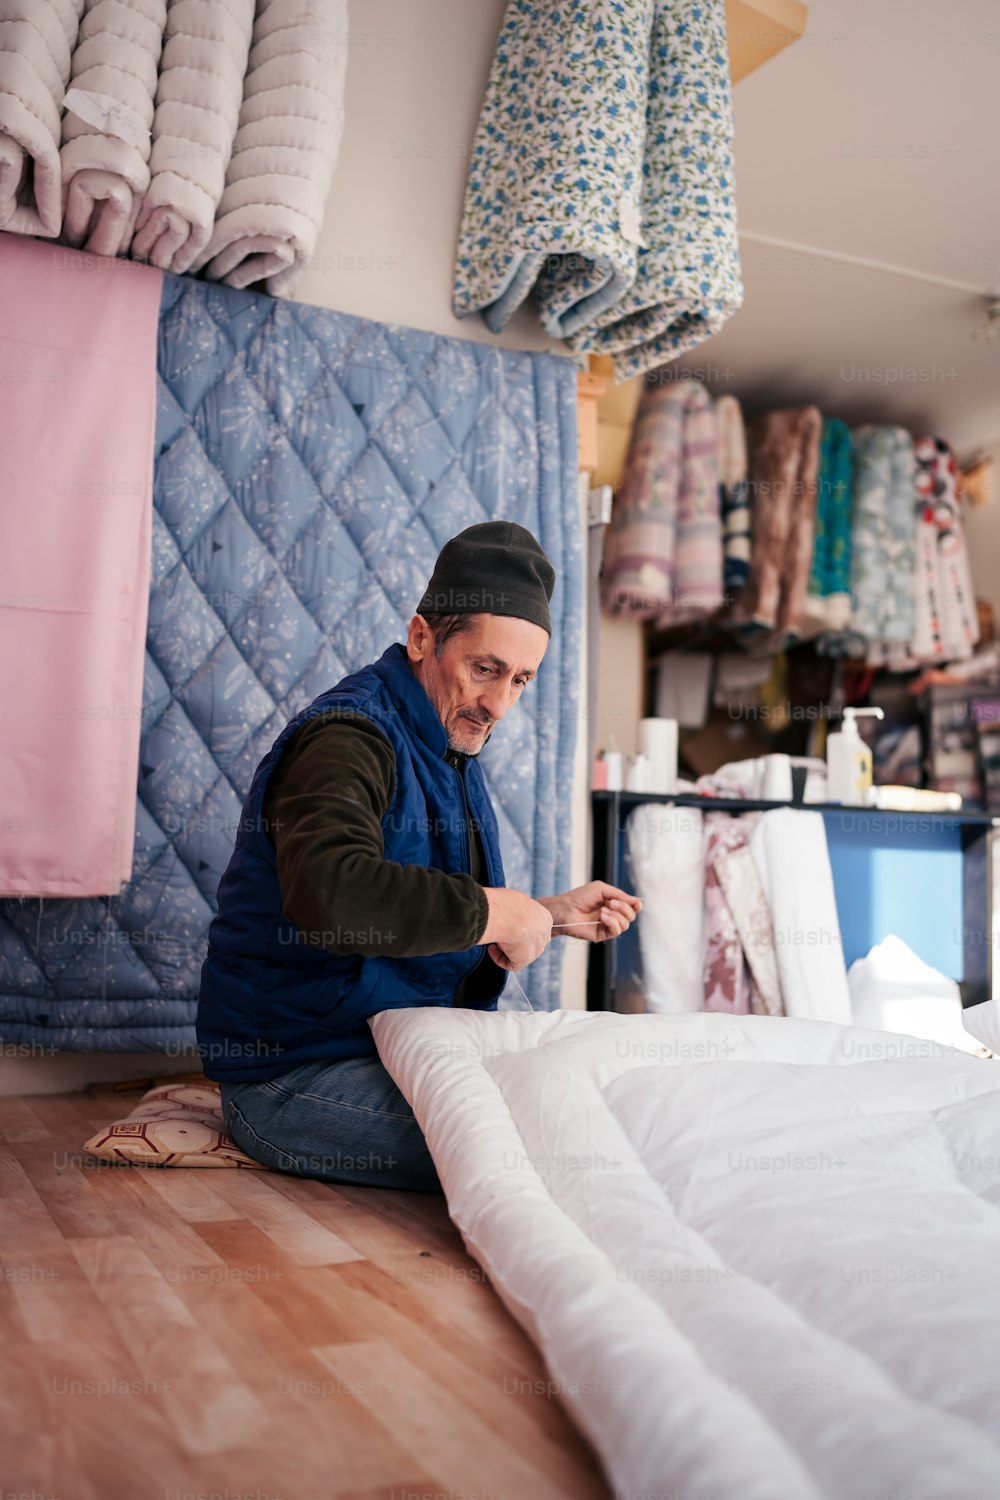 a man sitting on the floor working on a mattress